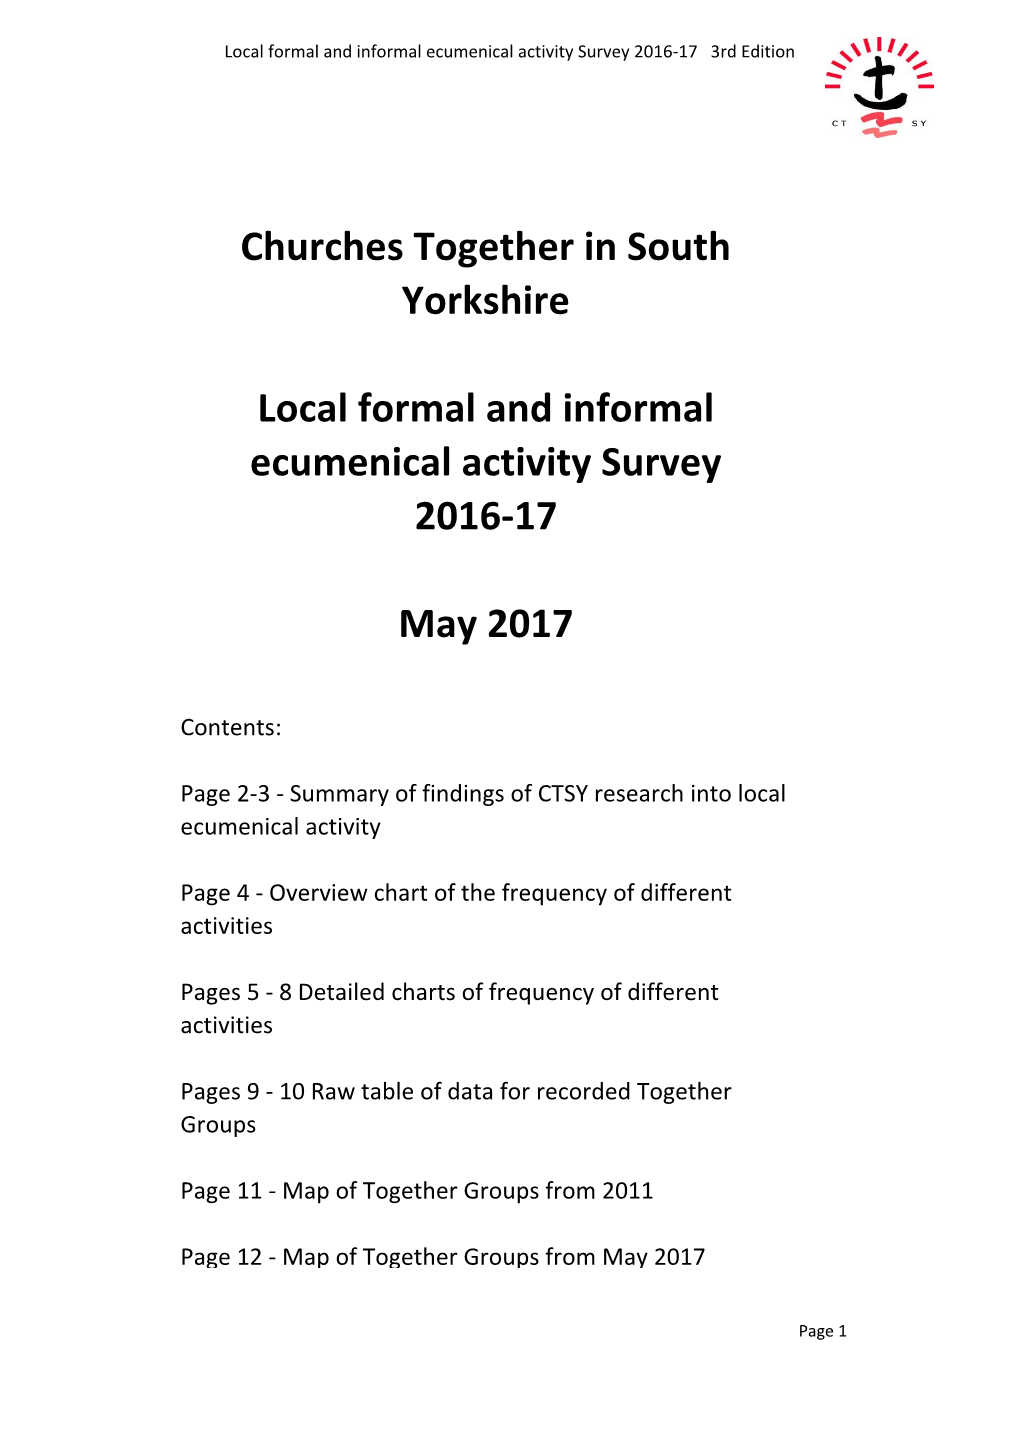 Churches Together in South Yorkshire Local Formal and Informal Ecumenical Activity Survey 2016-17 May 2017